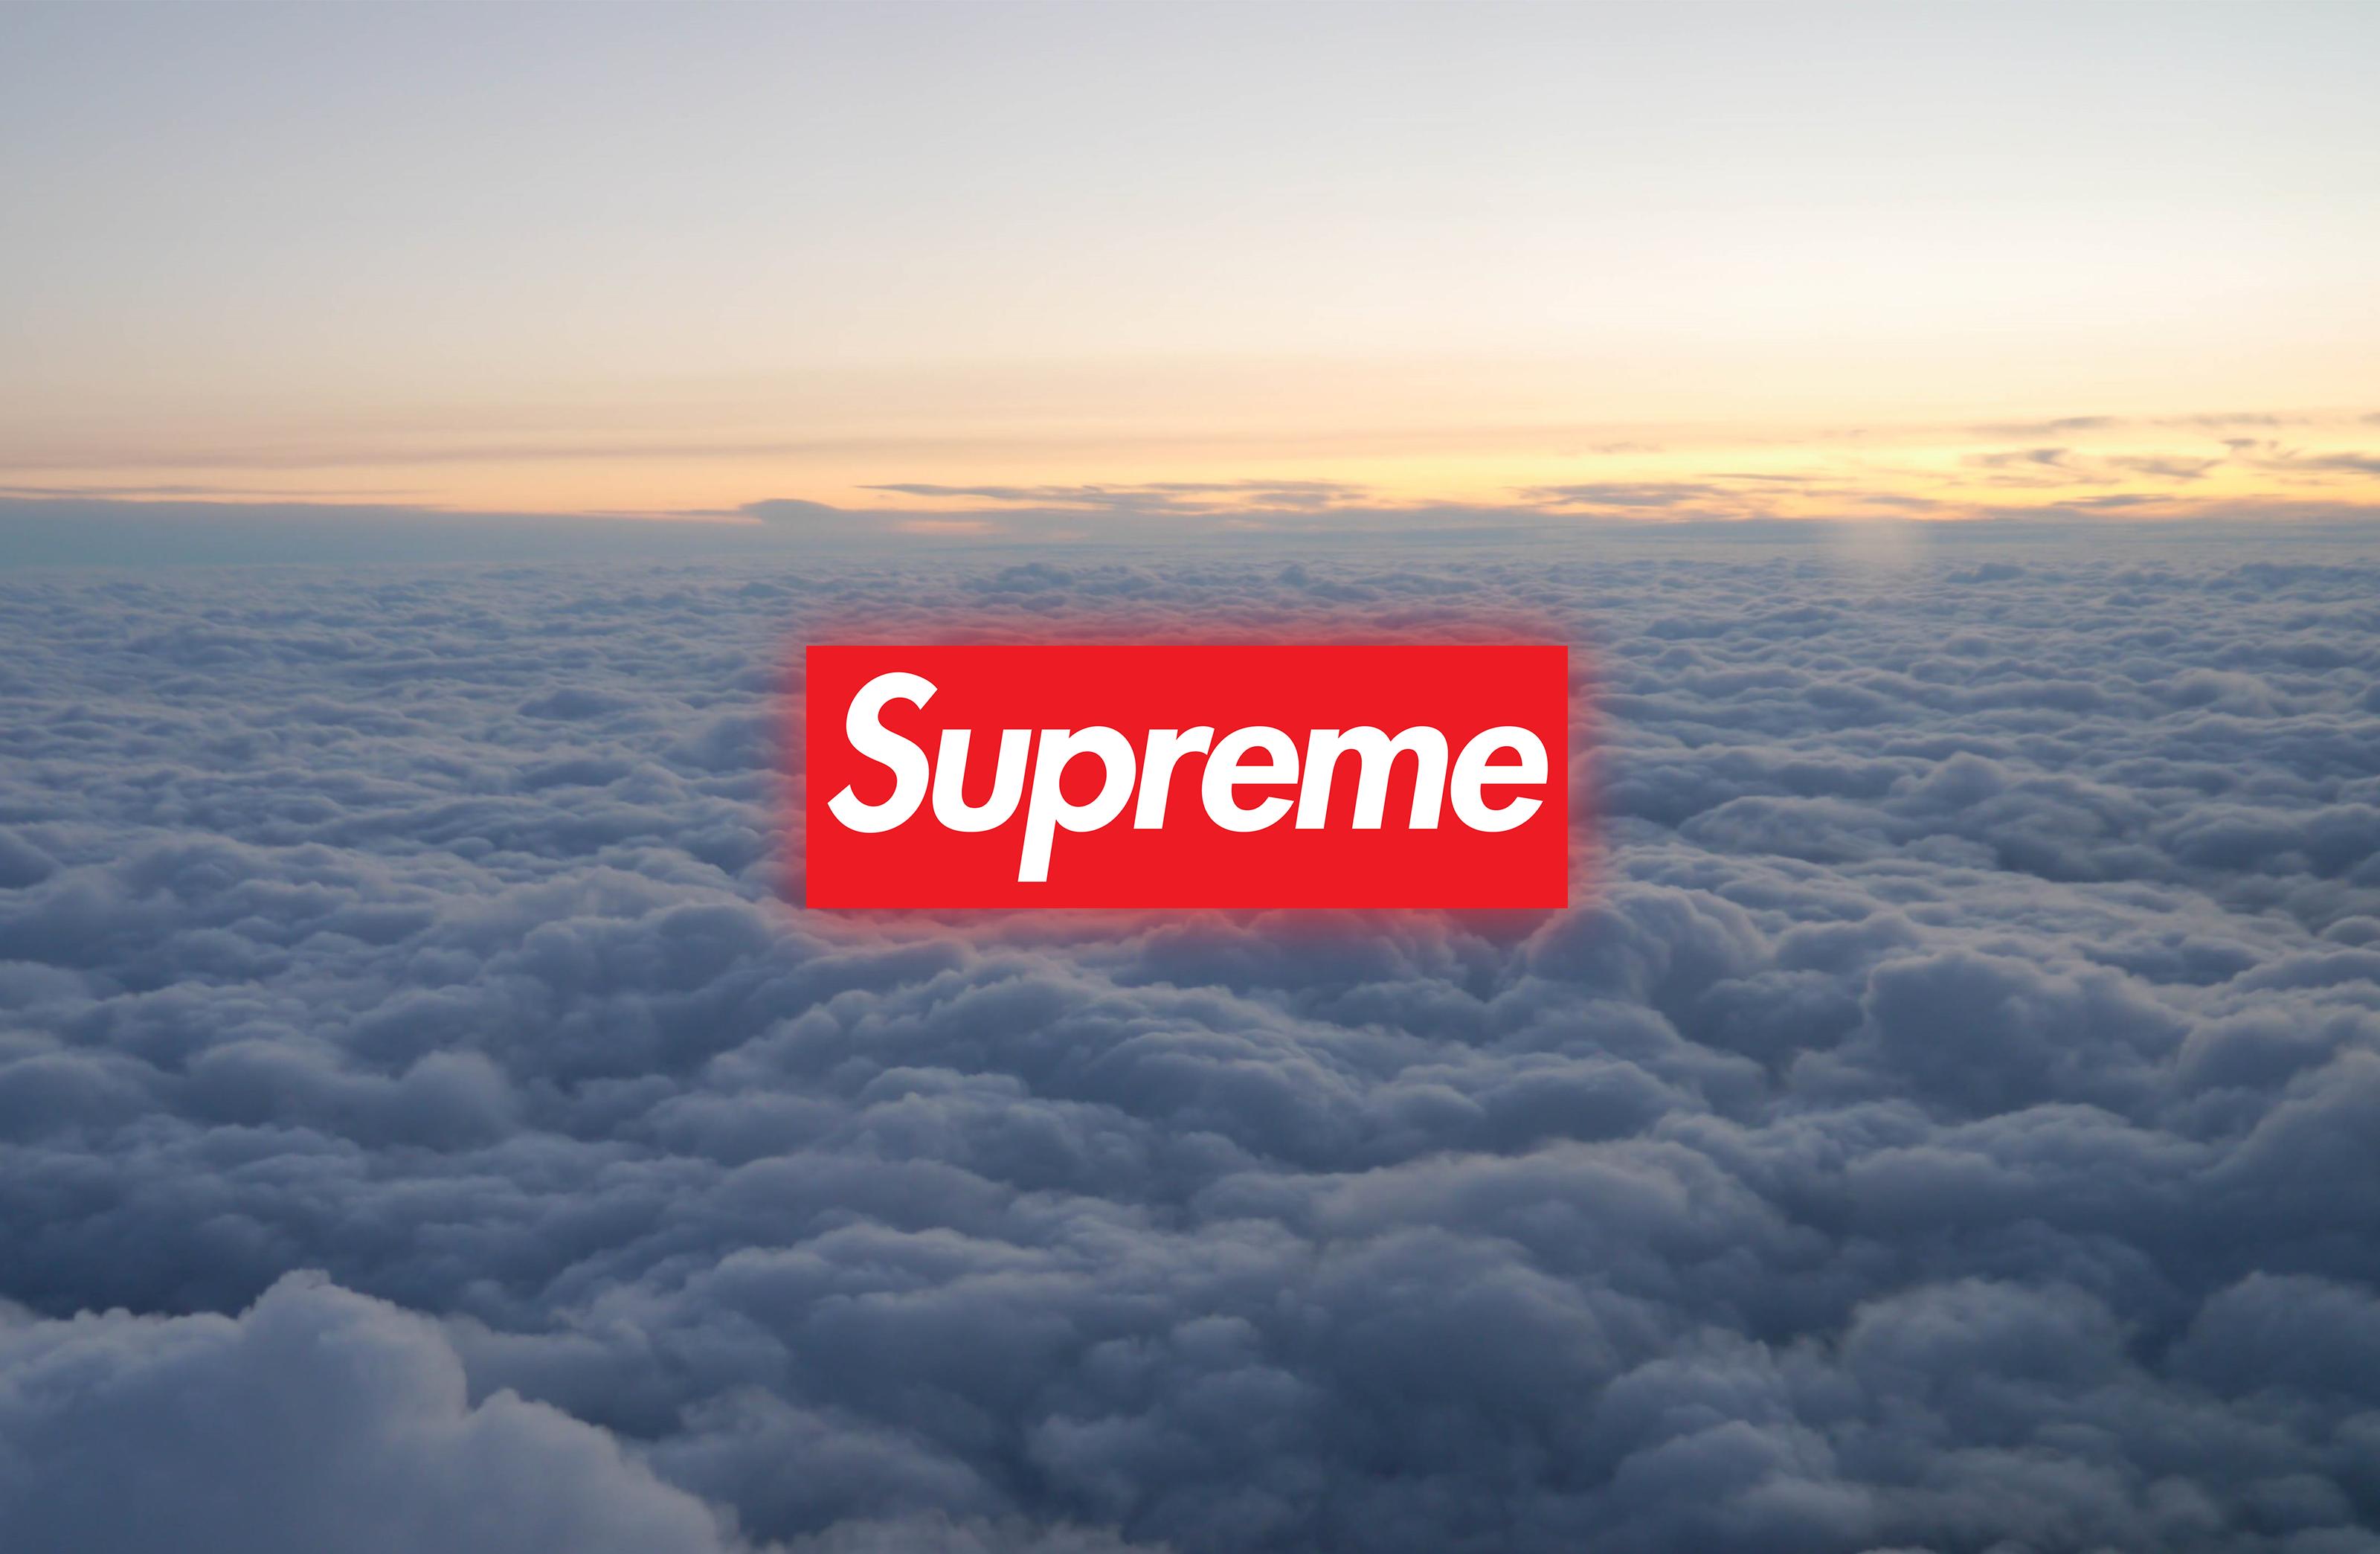 Supreme Wallpaper – HD Wallpapers Backgrounds of Your Choice